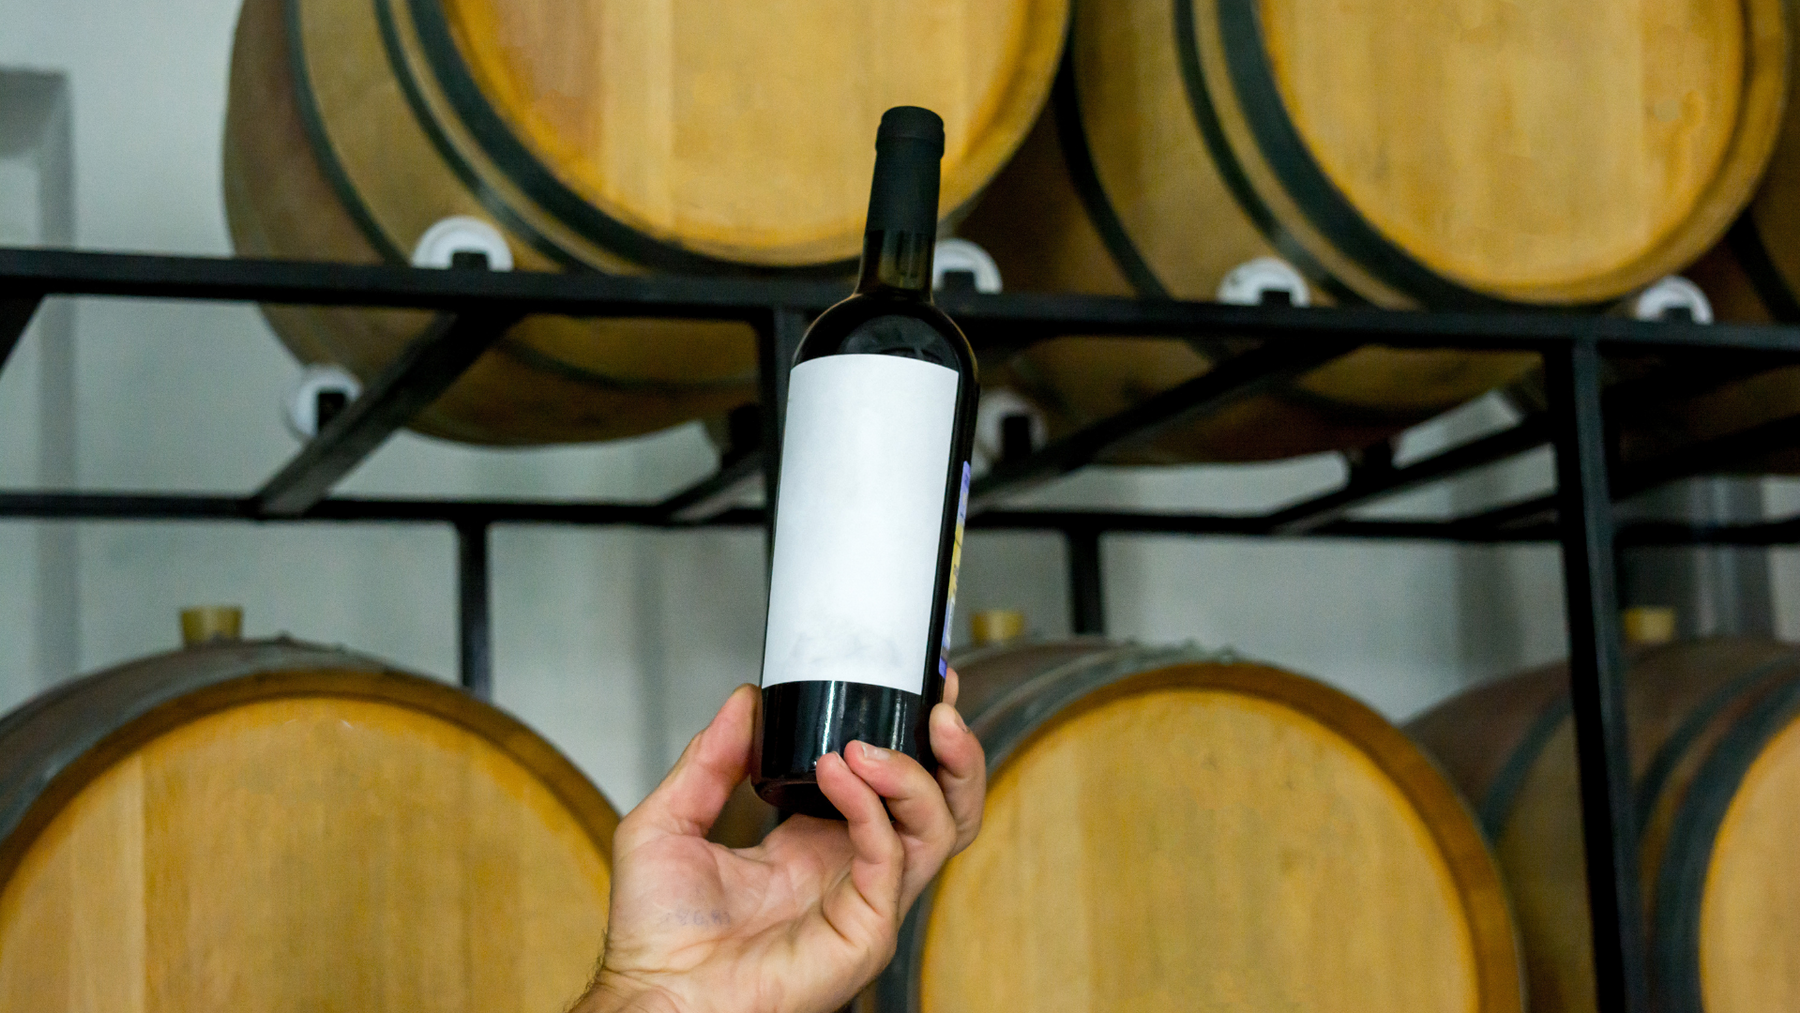 What is the purpose of storing wine?